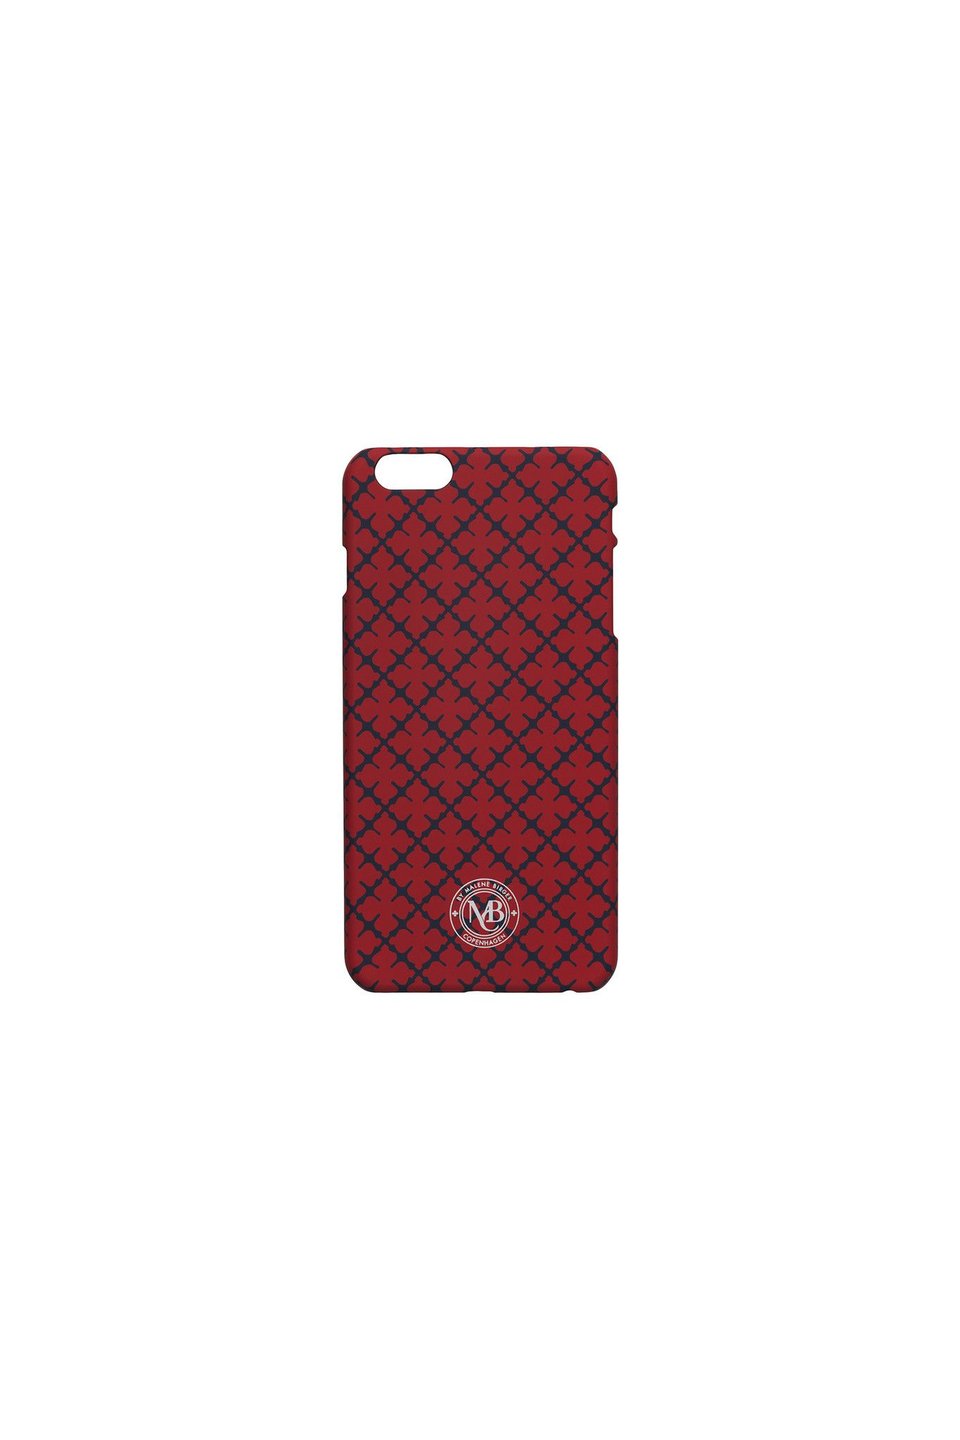 By Malene Birger Pamsy iPhone 6/6S Plus Cover - Bright Red